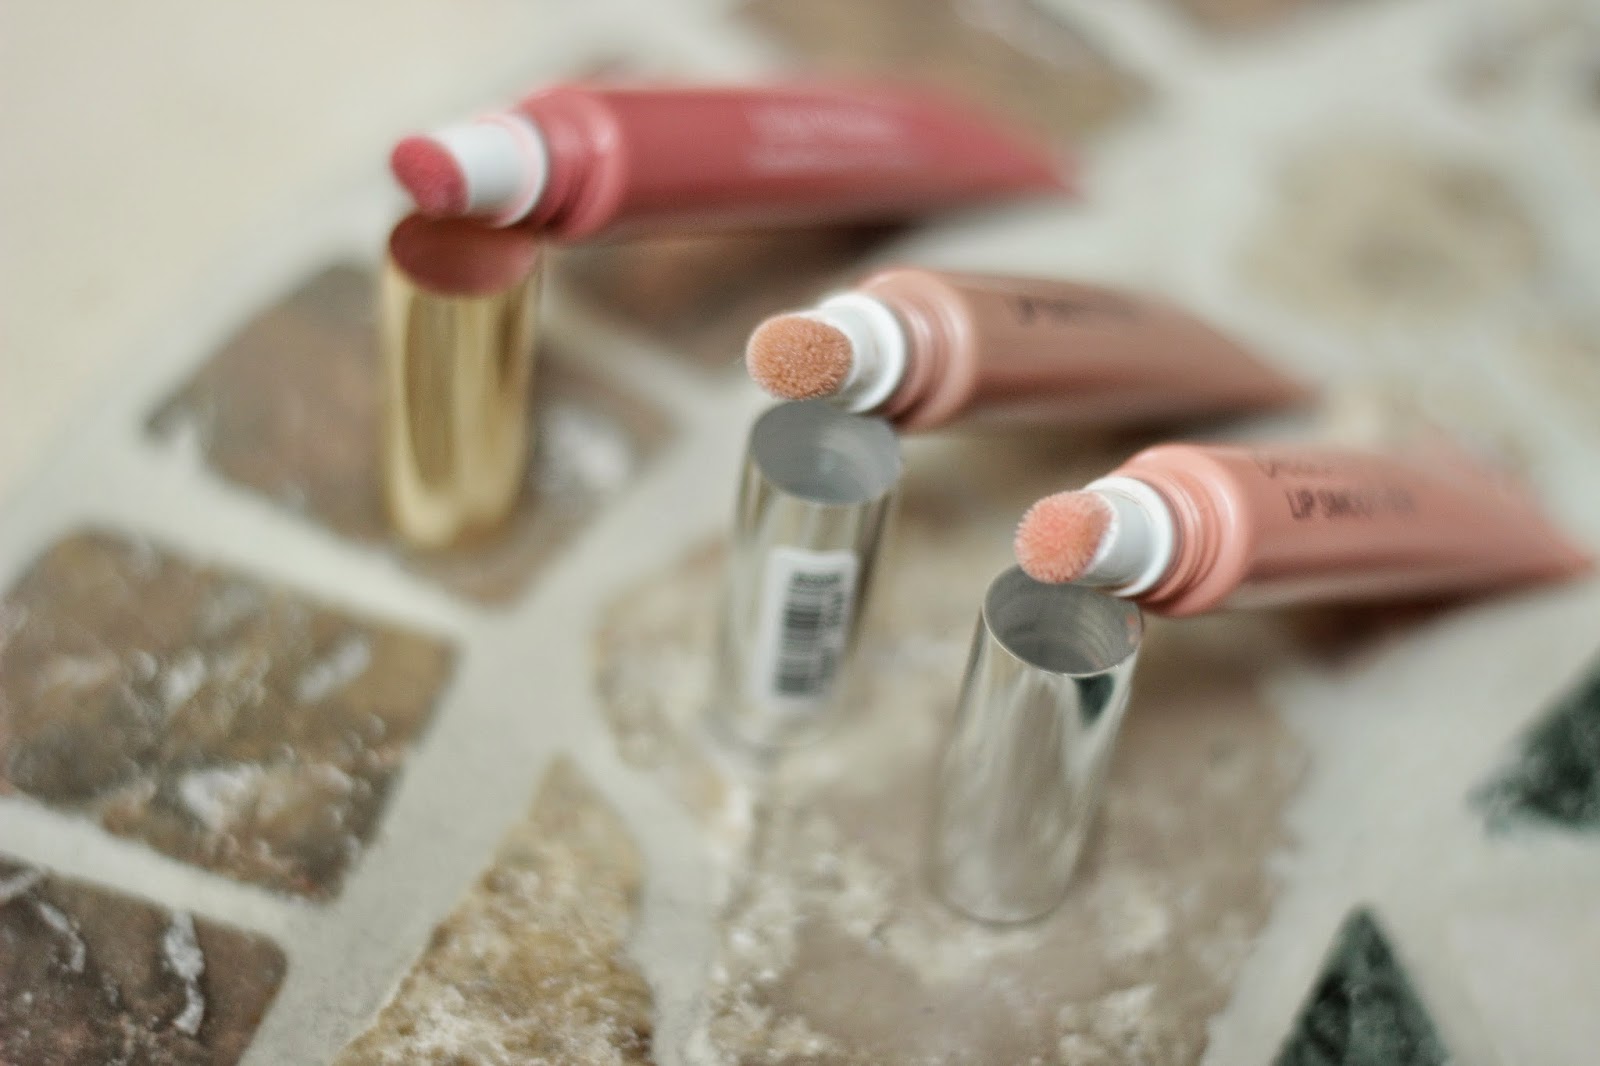 clarins natural lip perfector dupe 